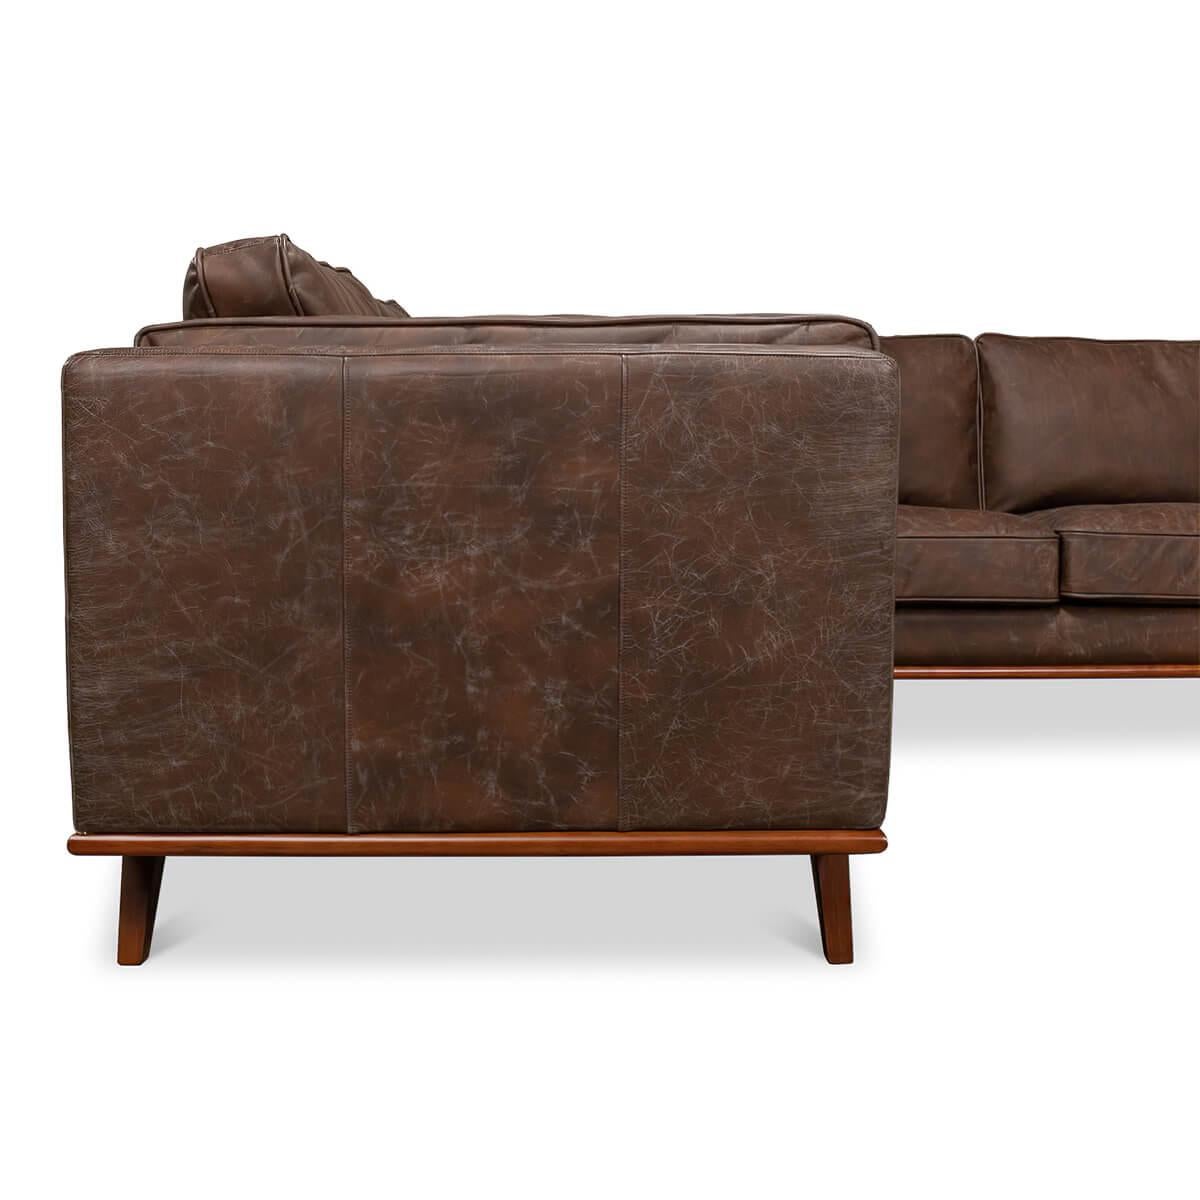 Contemporary European Mid Century Style Leather Sectional Sofa